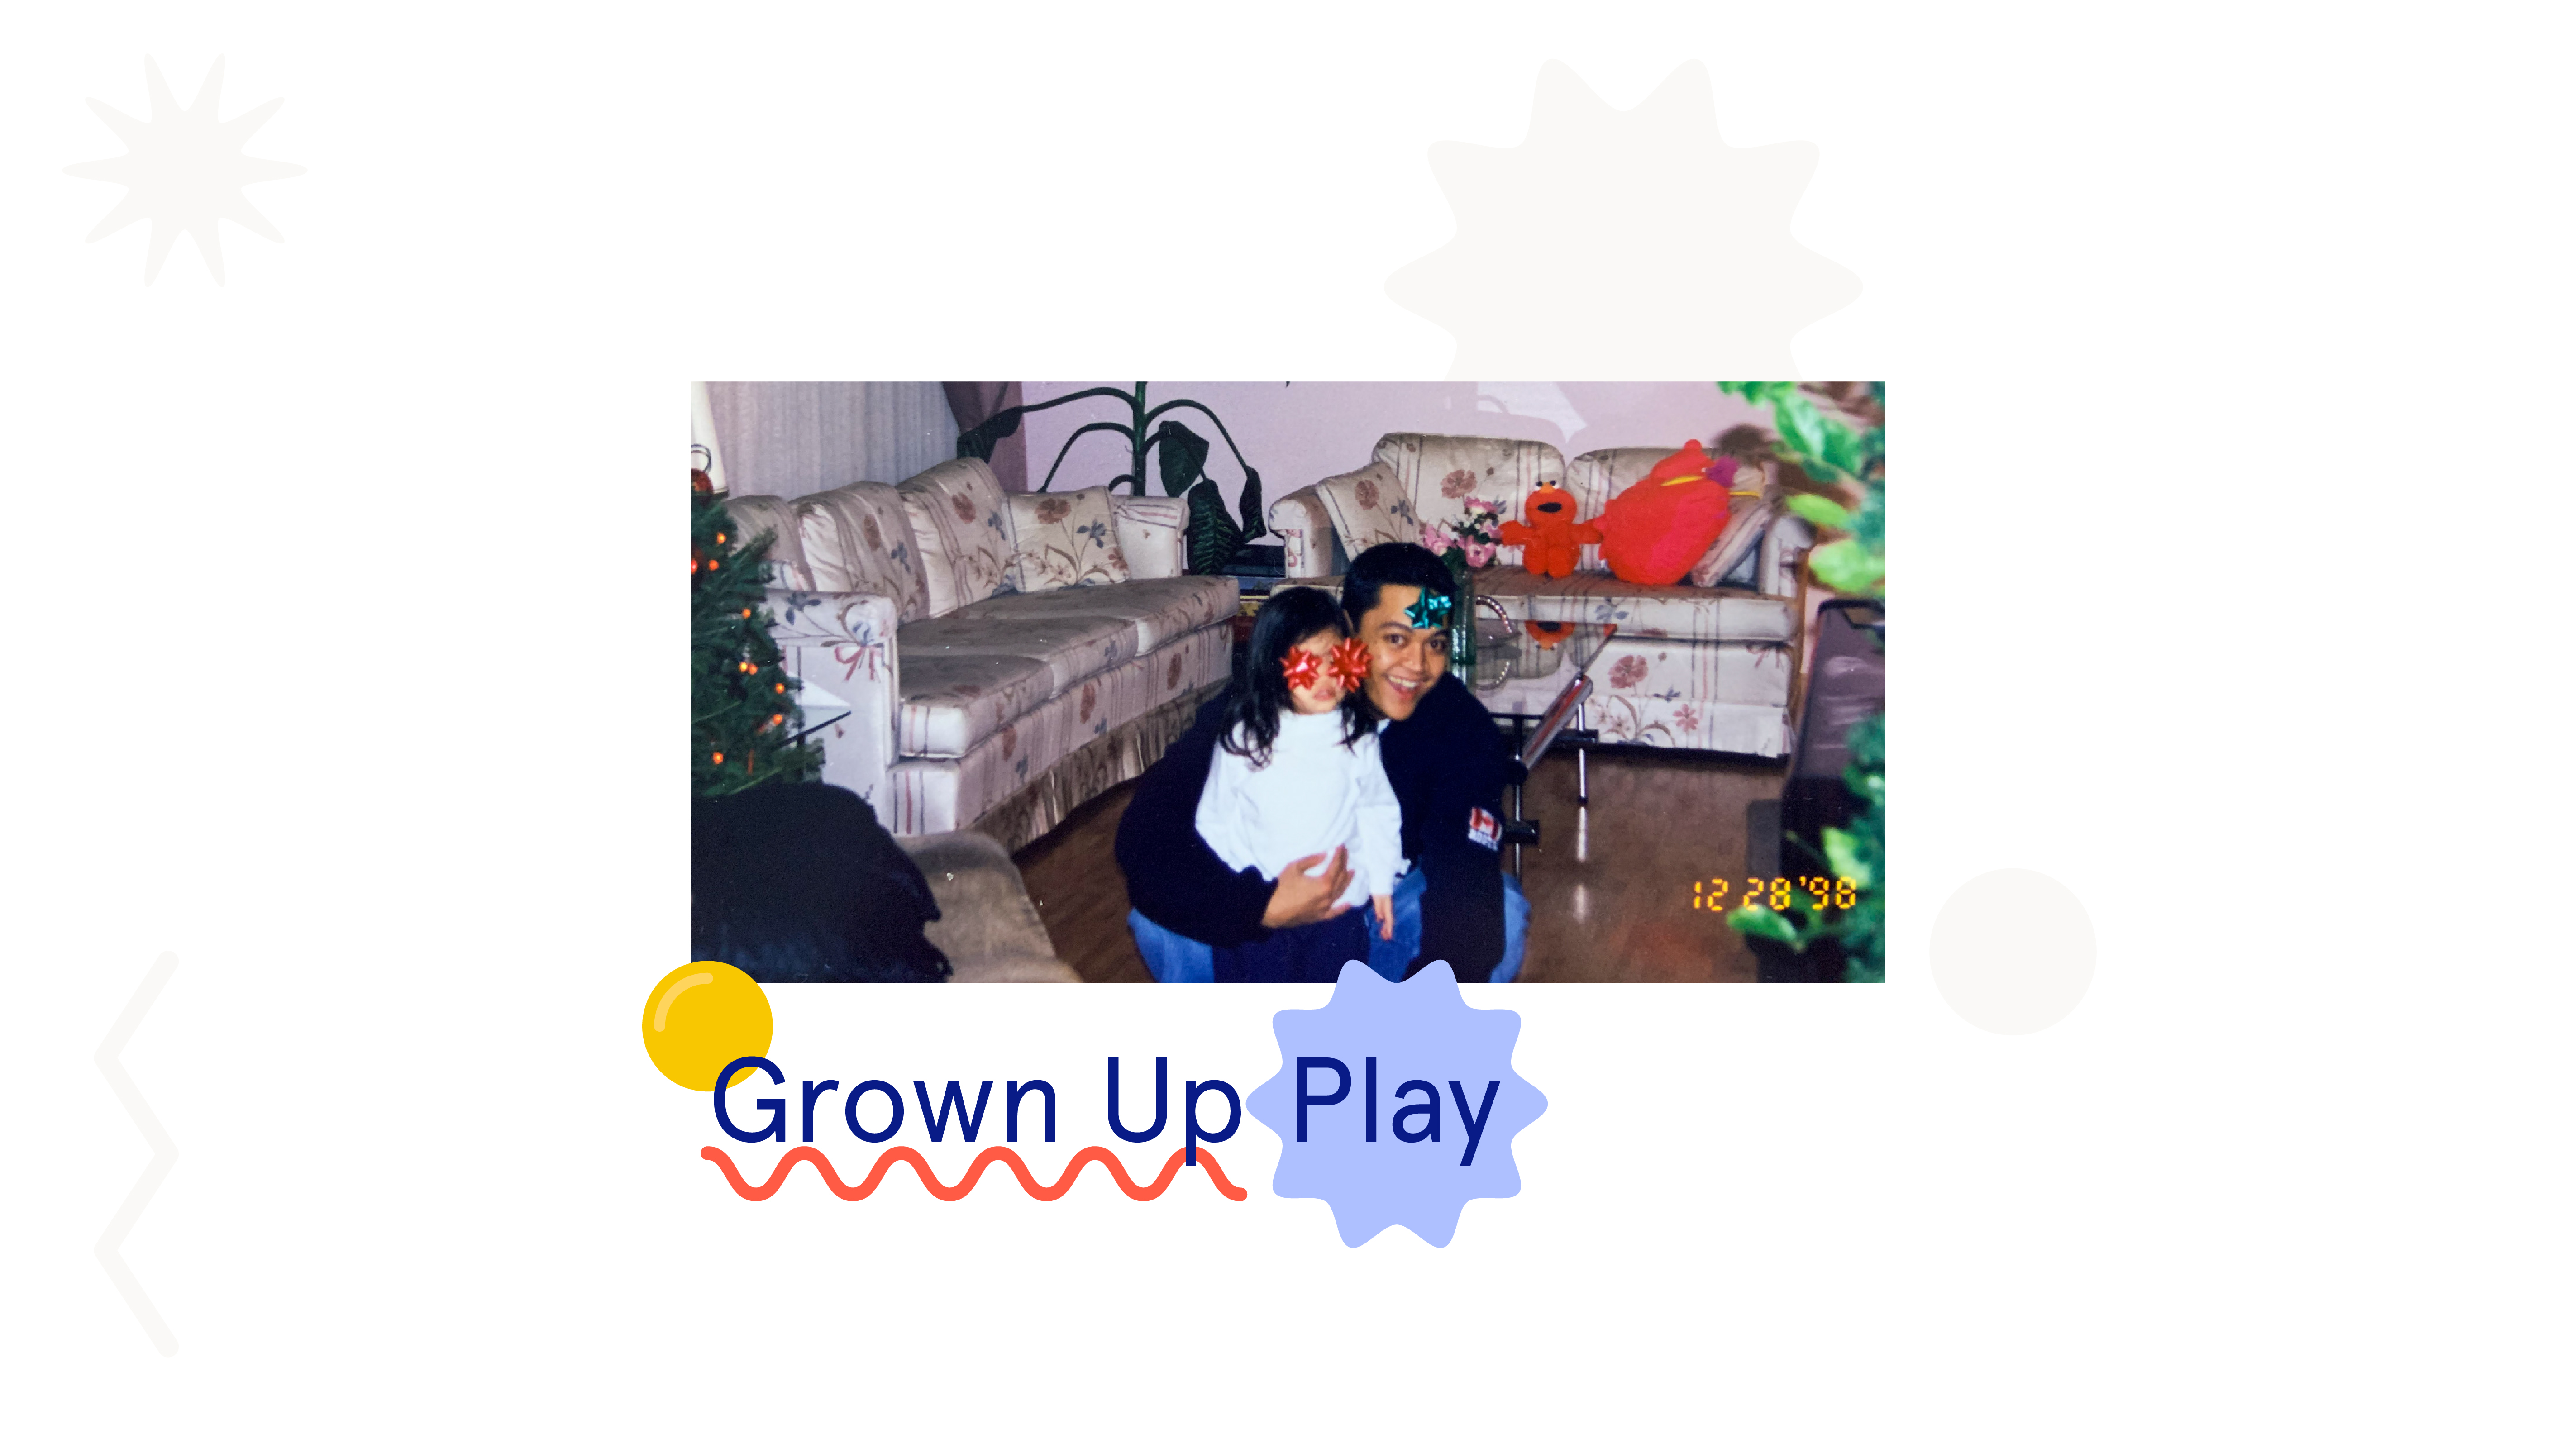 Grown Up Play